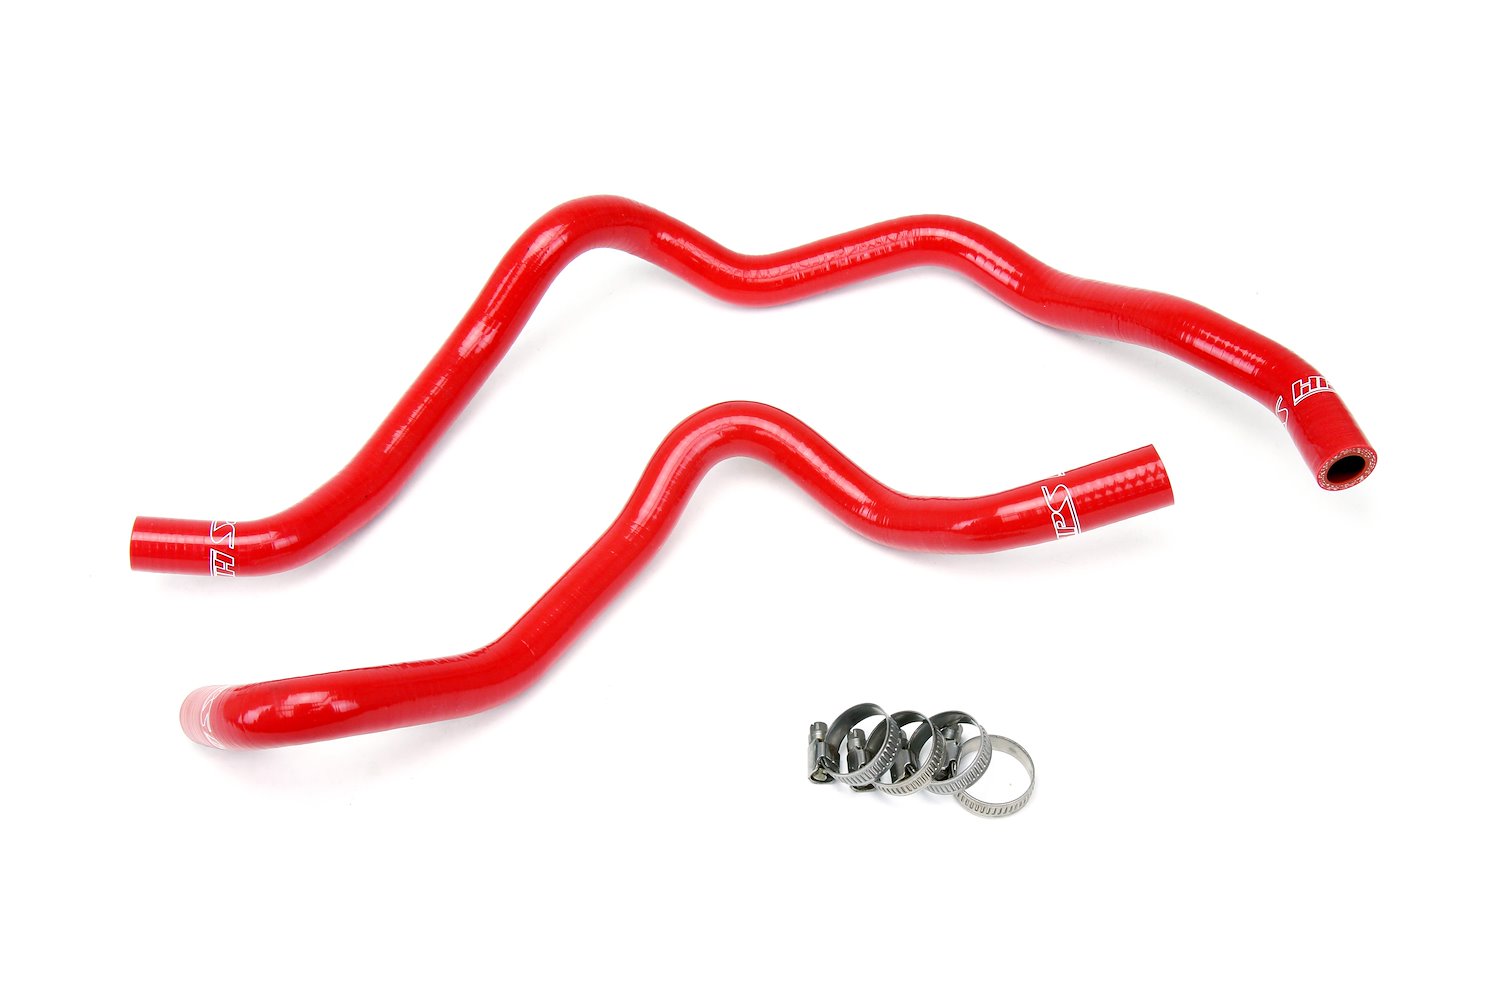 57-1849-RED Silicone Coolant Hose Kit, 3-Ply Reinforced Silicone, Replaces Factory Rubber Heater Hoses